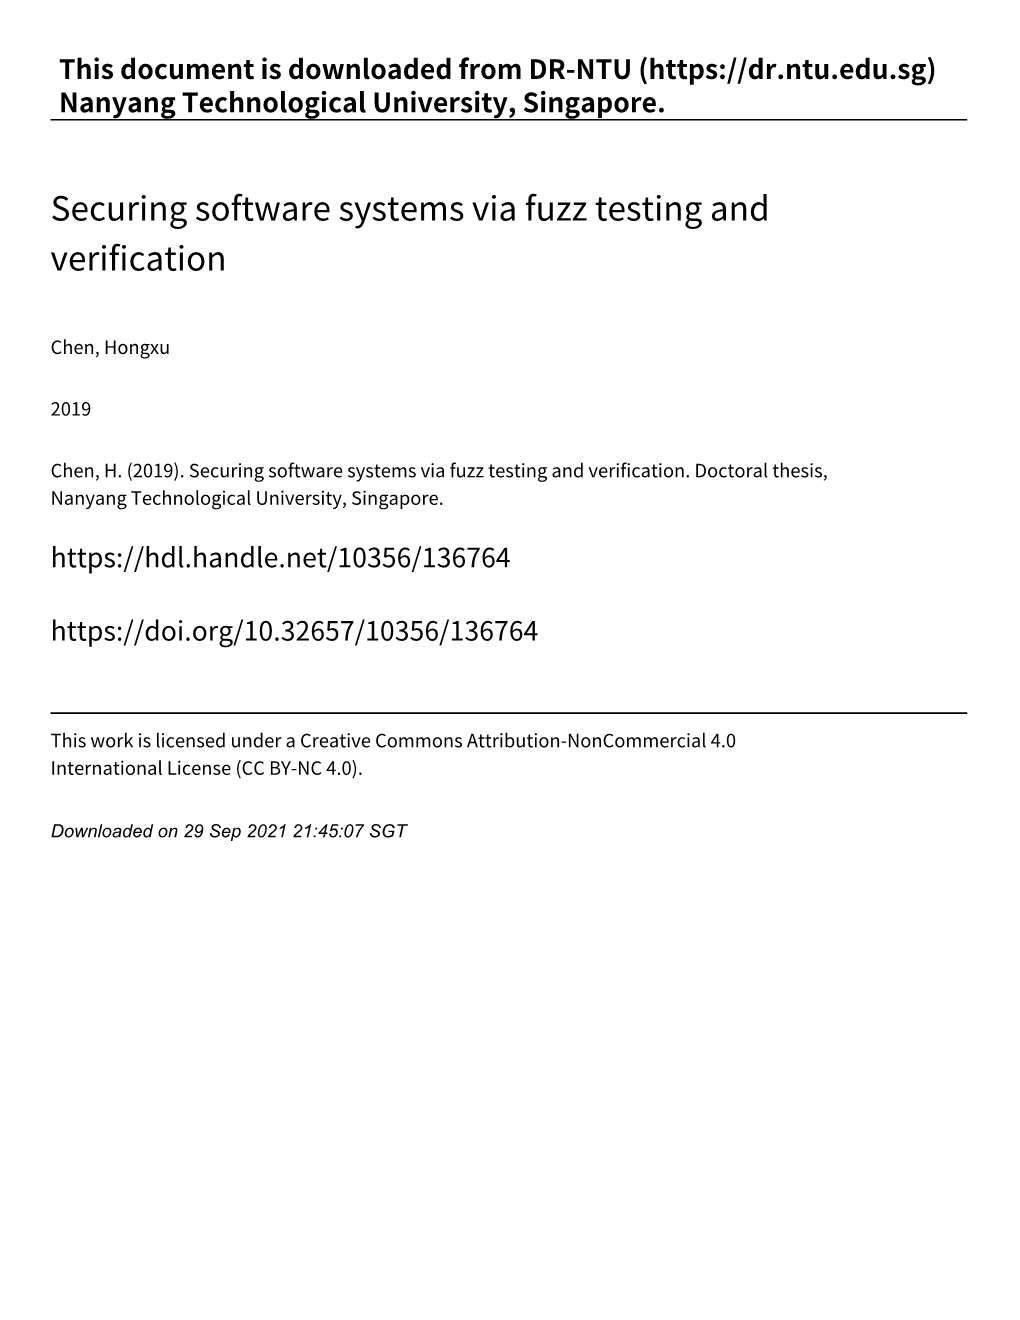 Securing Software Systems Via Fuzz Testing and Verification